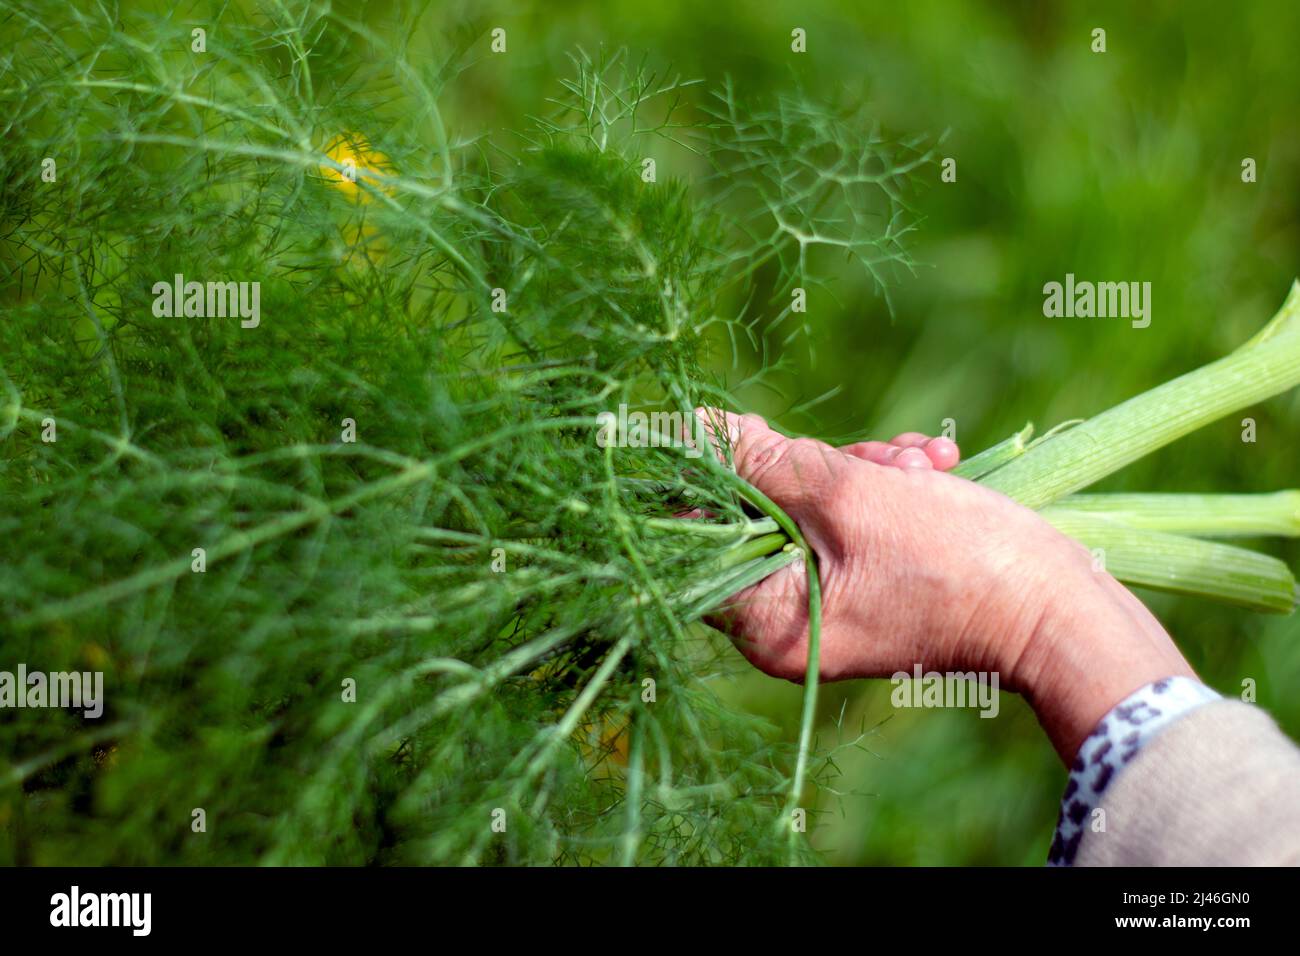 Holding a spring of fresh fennel, fennel bouquet for medical and aromatic uses. Gathering fennel for tea. Stock Photo